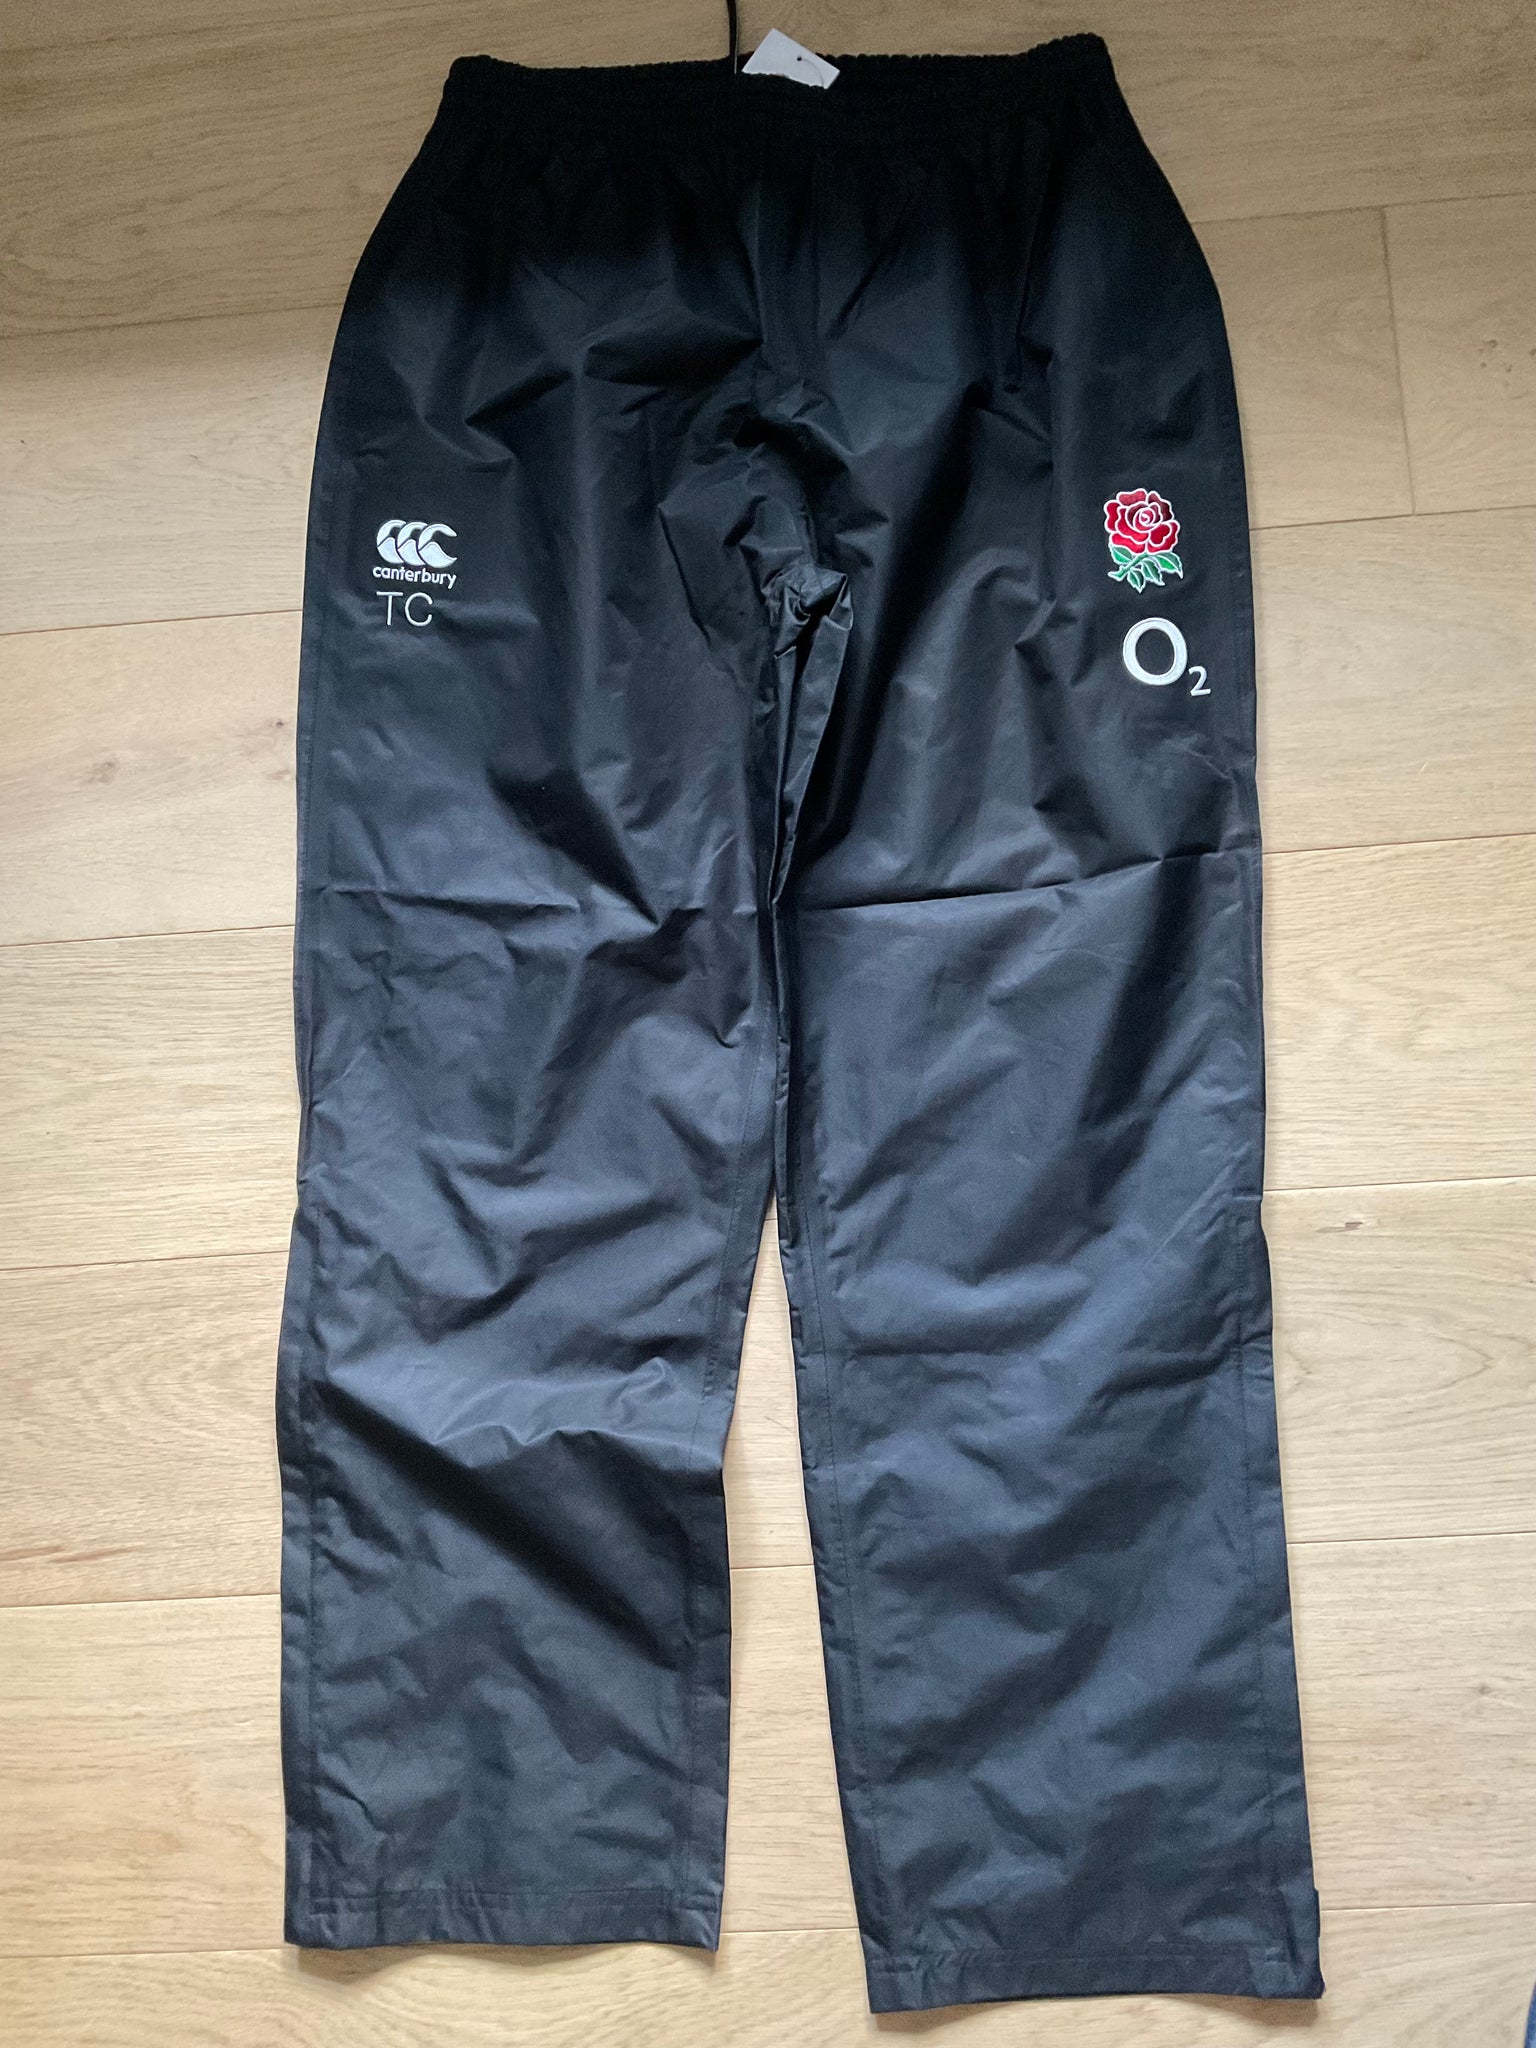 Tom Curry - England Rugby Contact Pants [Black]